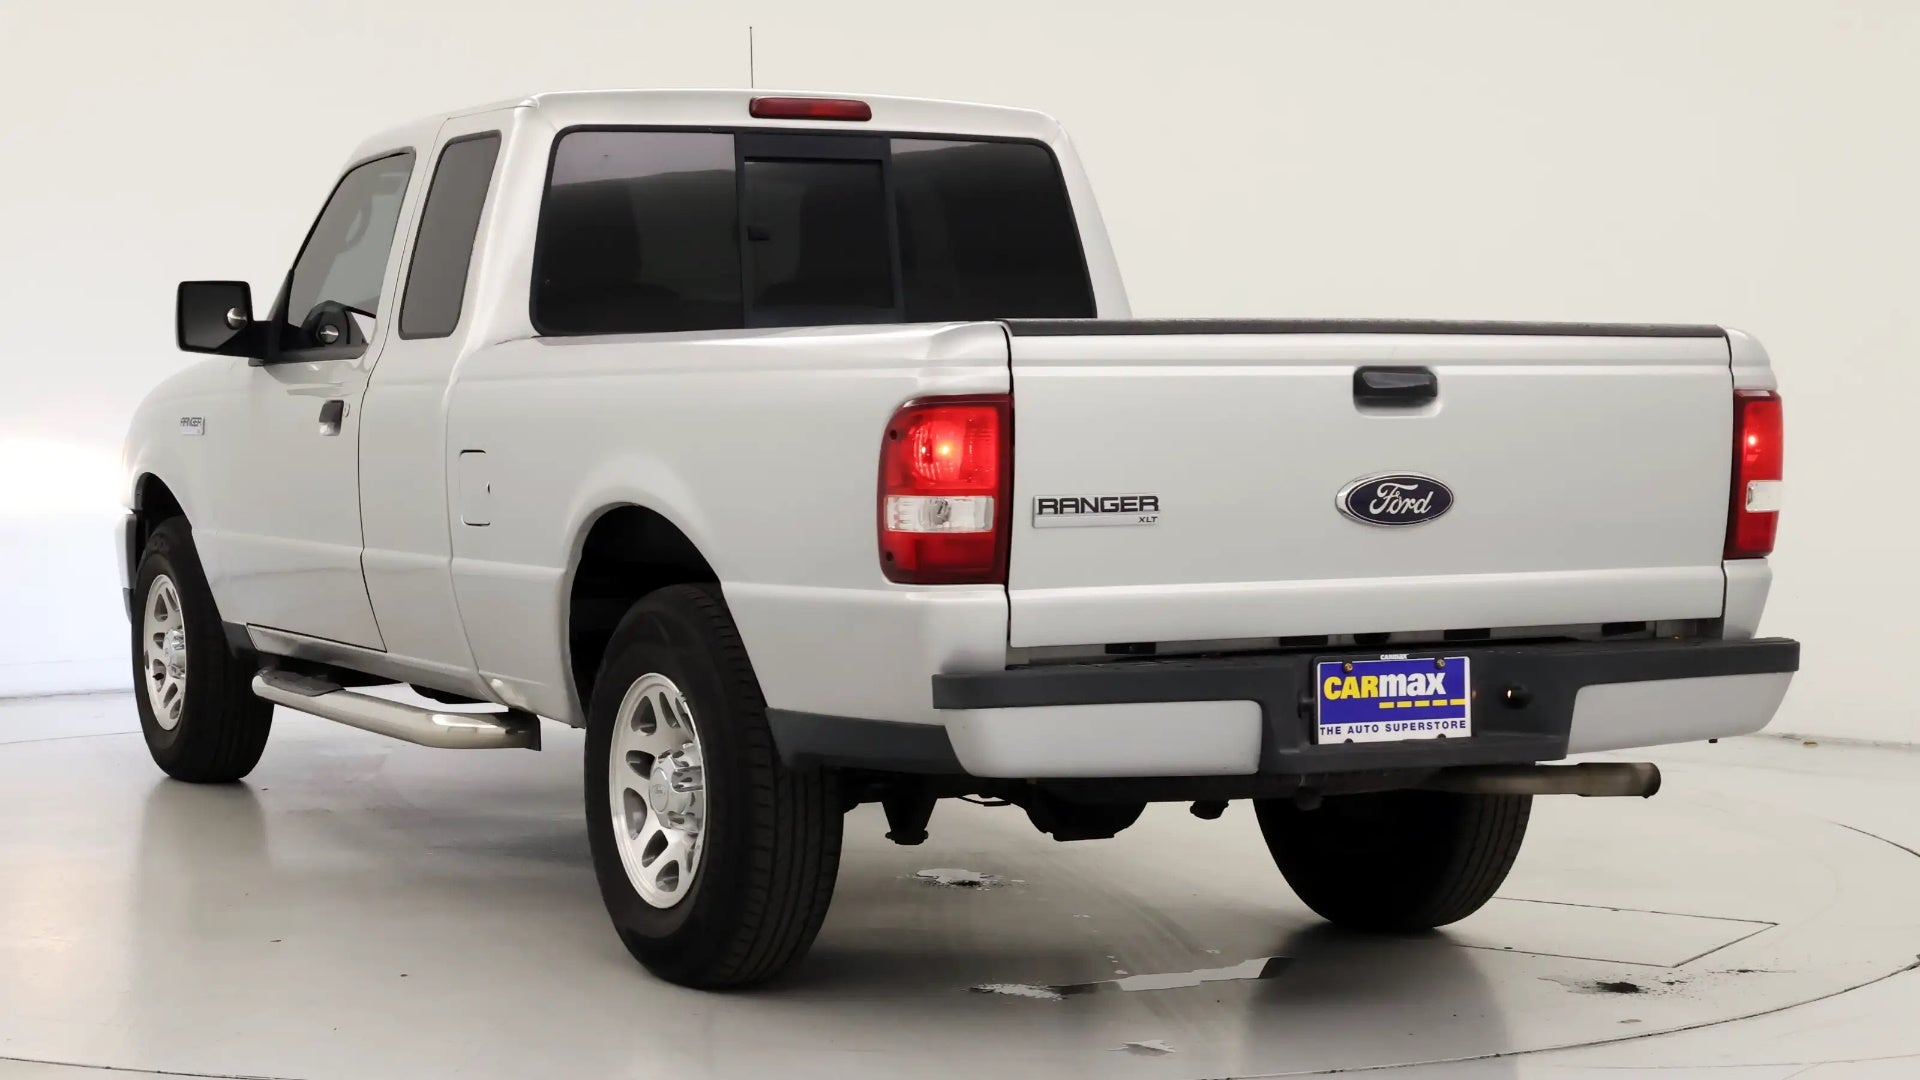 2010 Ford Ranger Reviews  Verified Owners